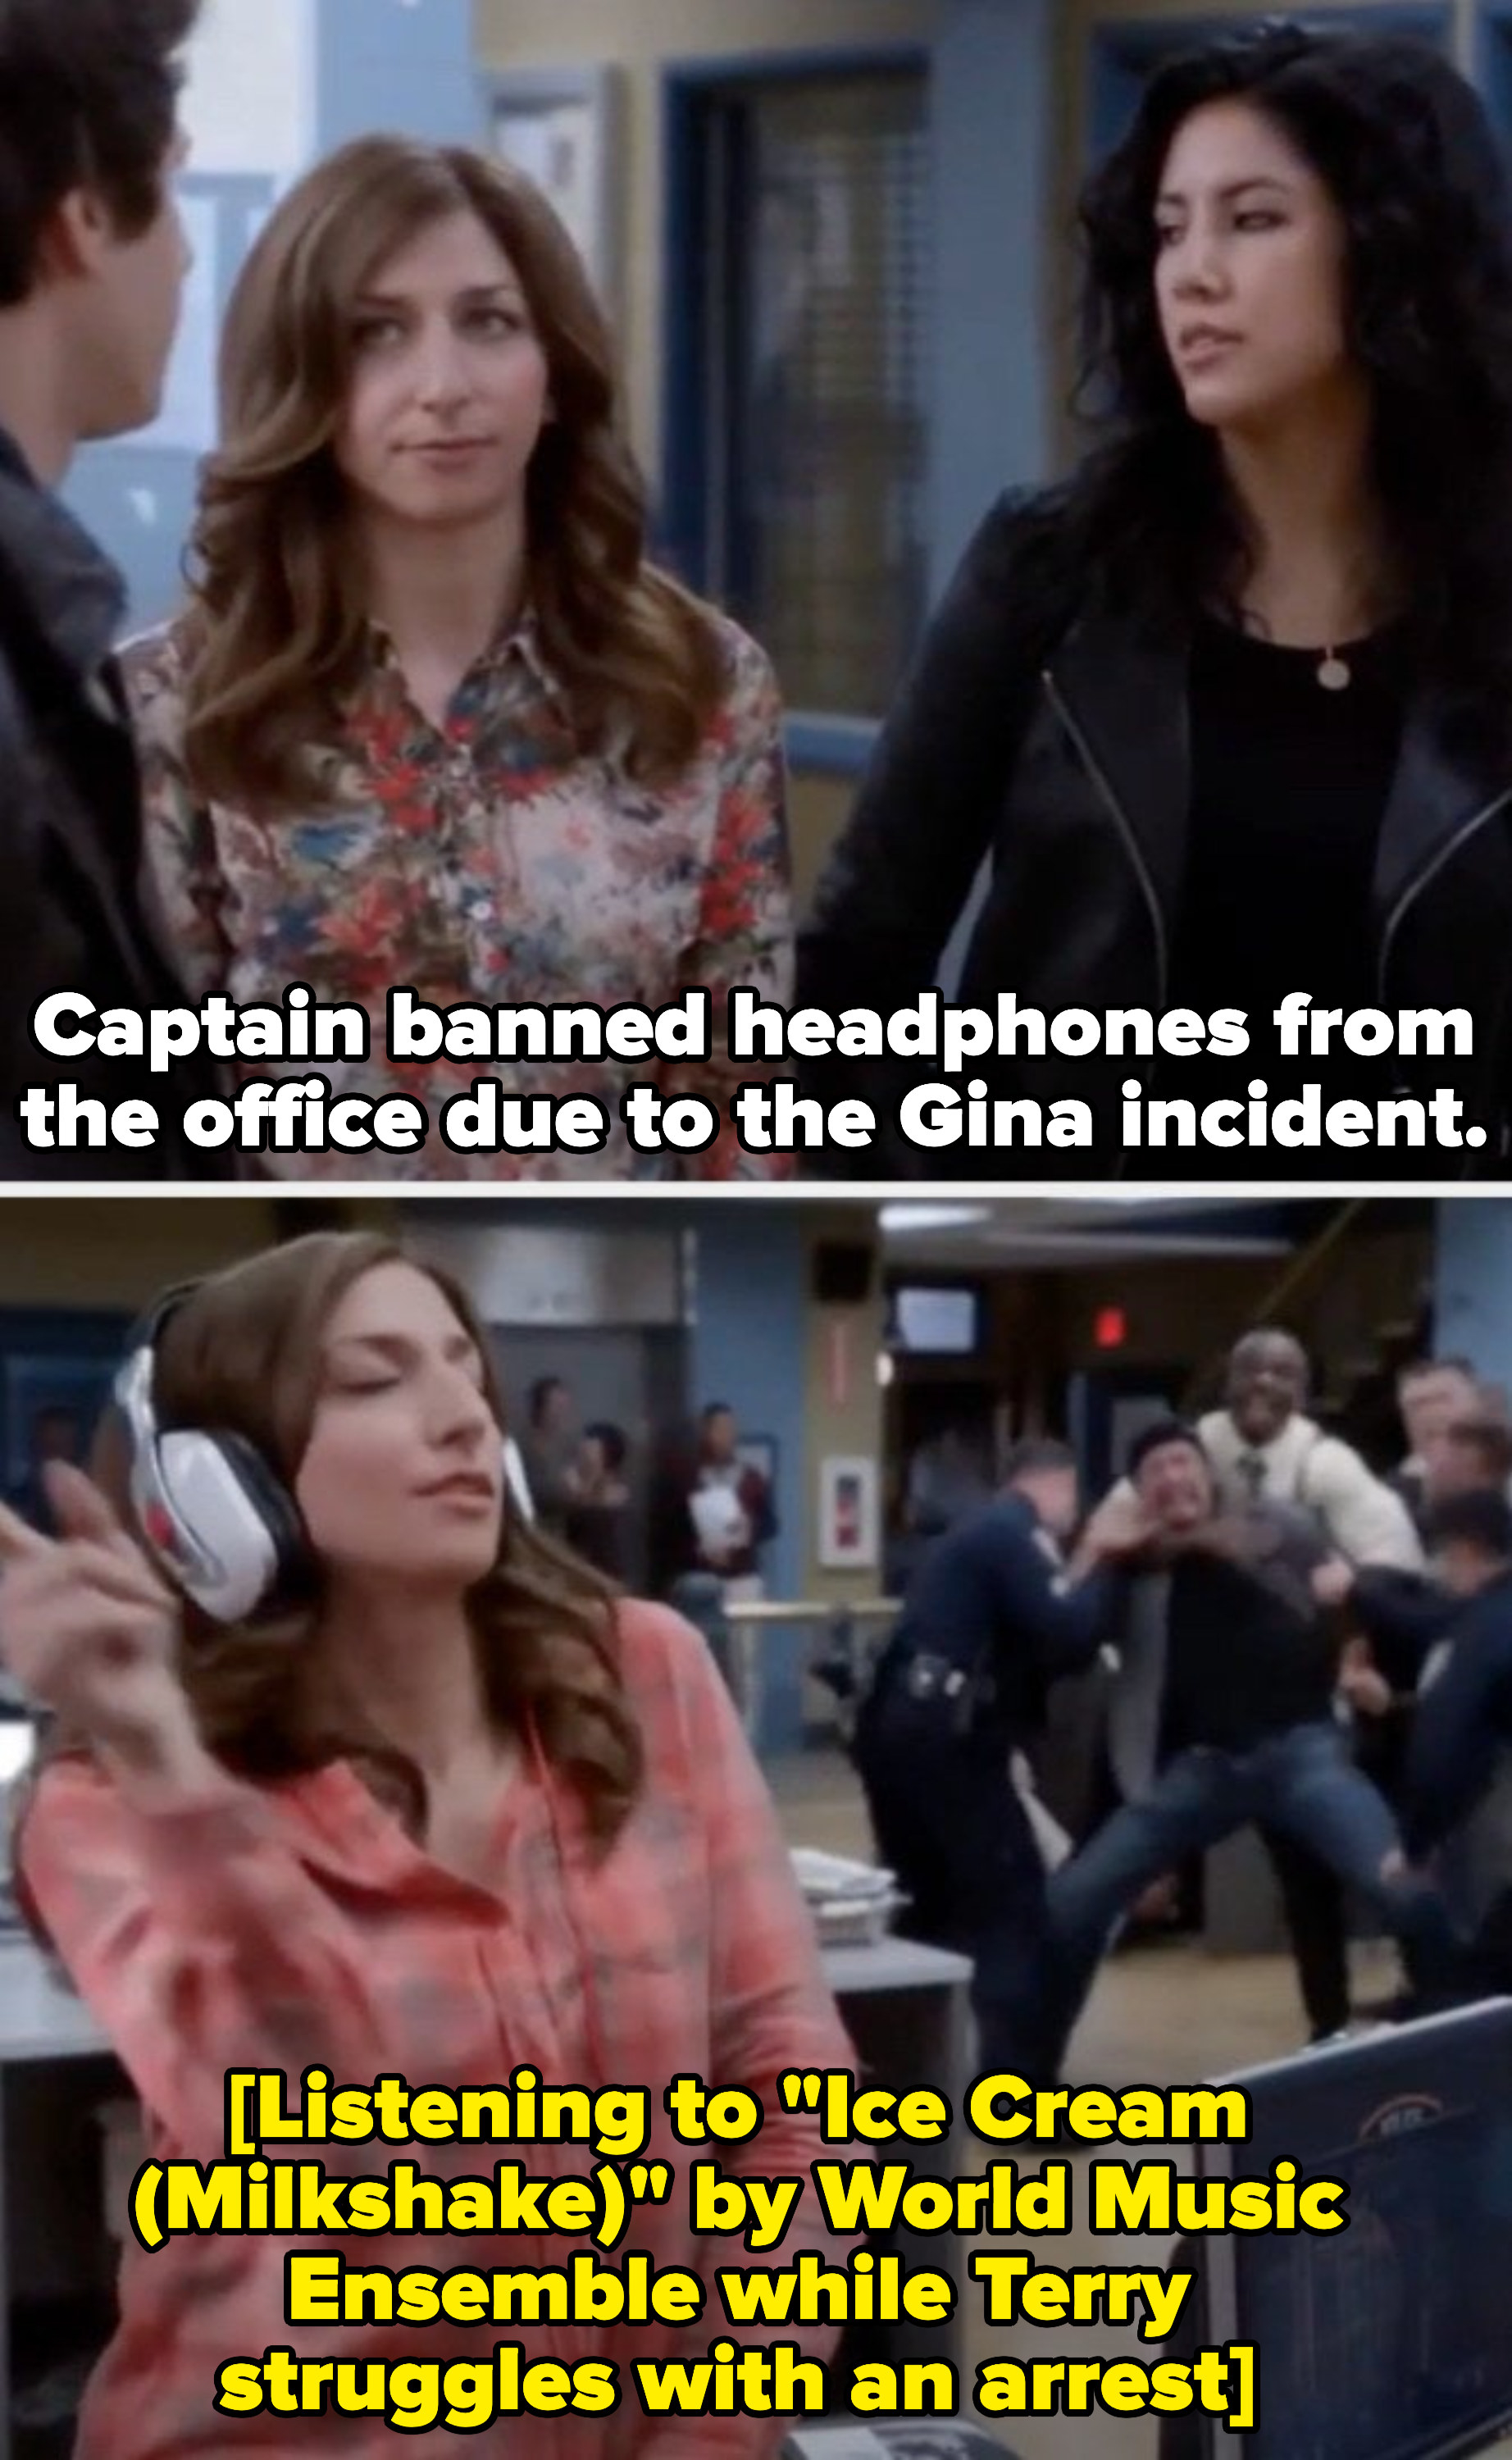 Rosa to Jake: &quot;Captain banned headphones from the office due to the Gina incident.&quot; Cut to Gina listening to music with her eyes closed while Terry is trying to take down a suspect.